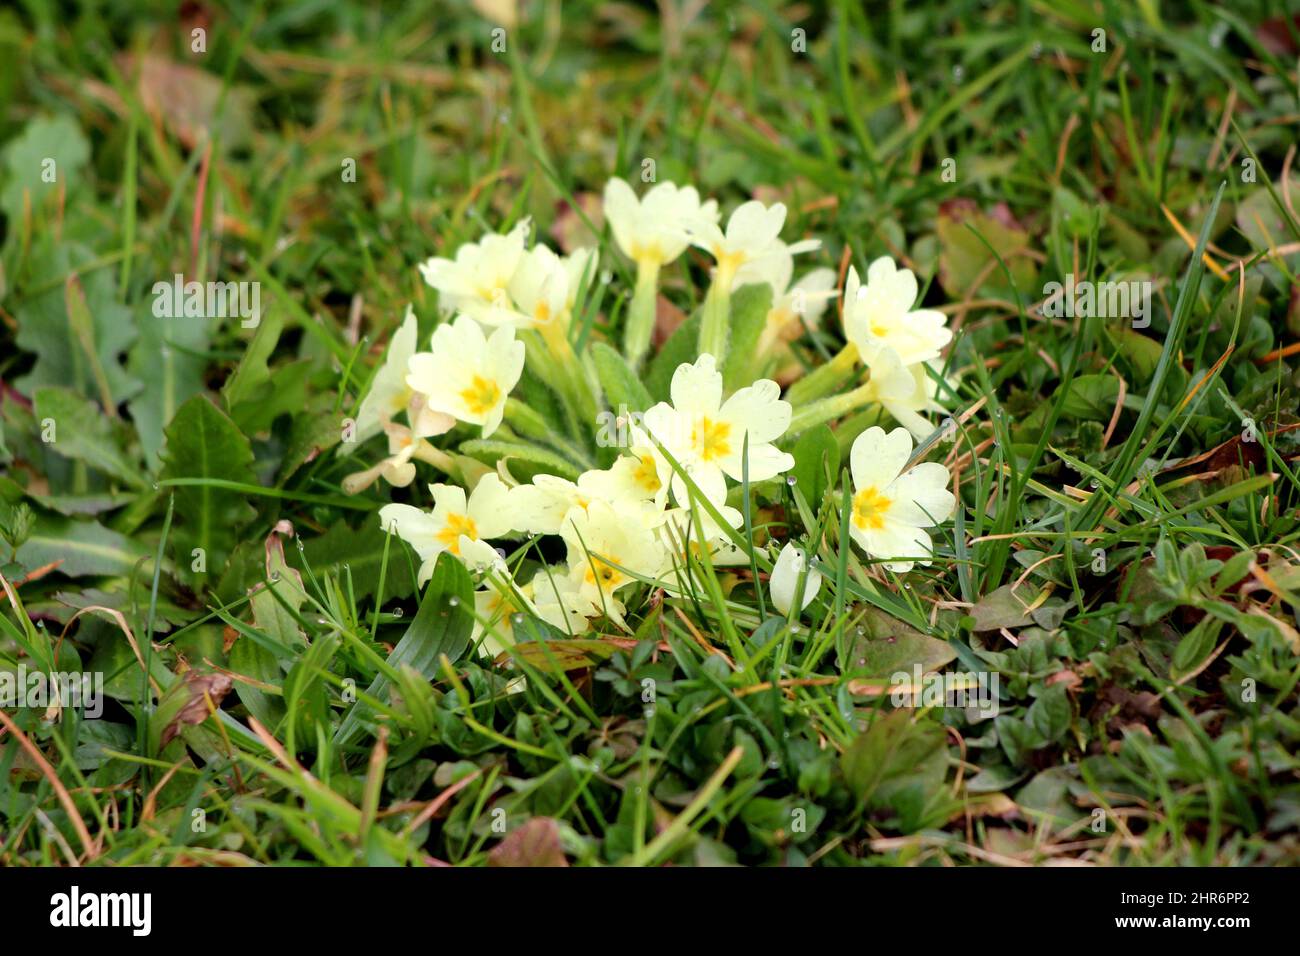 Bunch of Primrose or Primula vulgaris or Common primrose or English primrose small yellow flowers with dark yellow center and thick dark green leaves Stock Photo